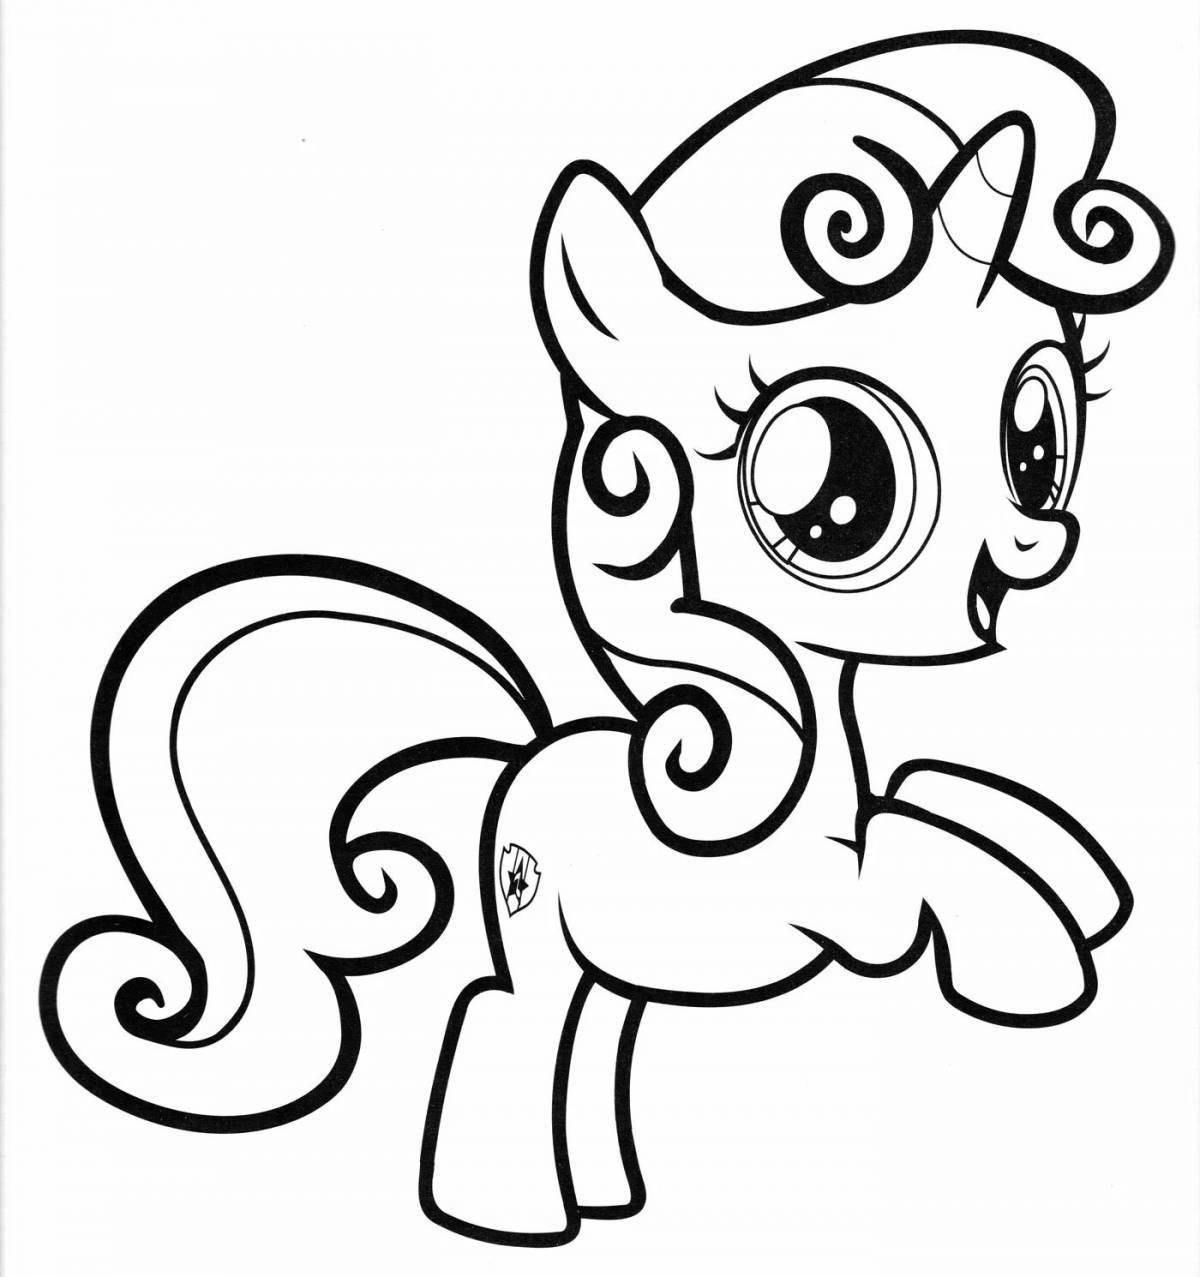 Blessed apple blossom coloring page